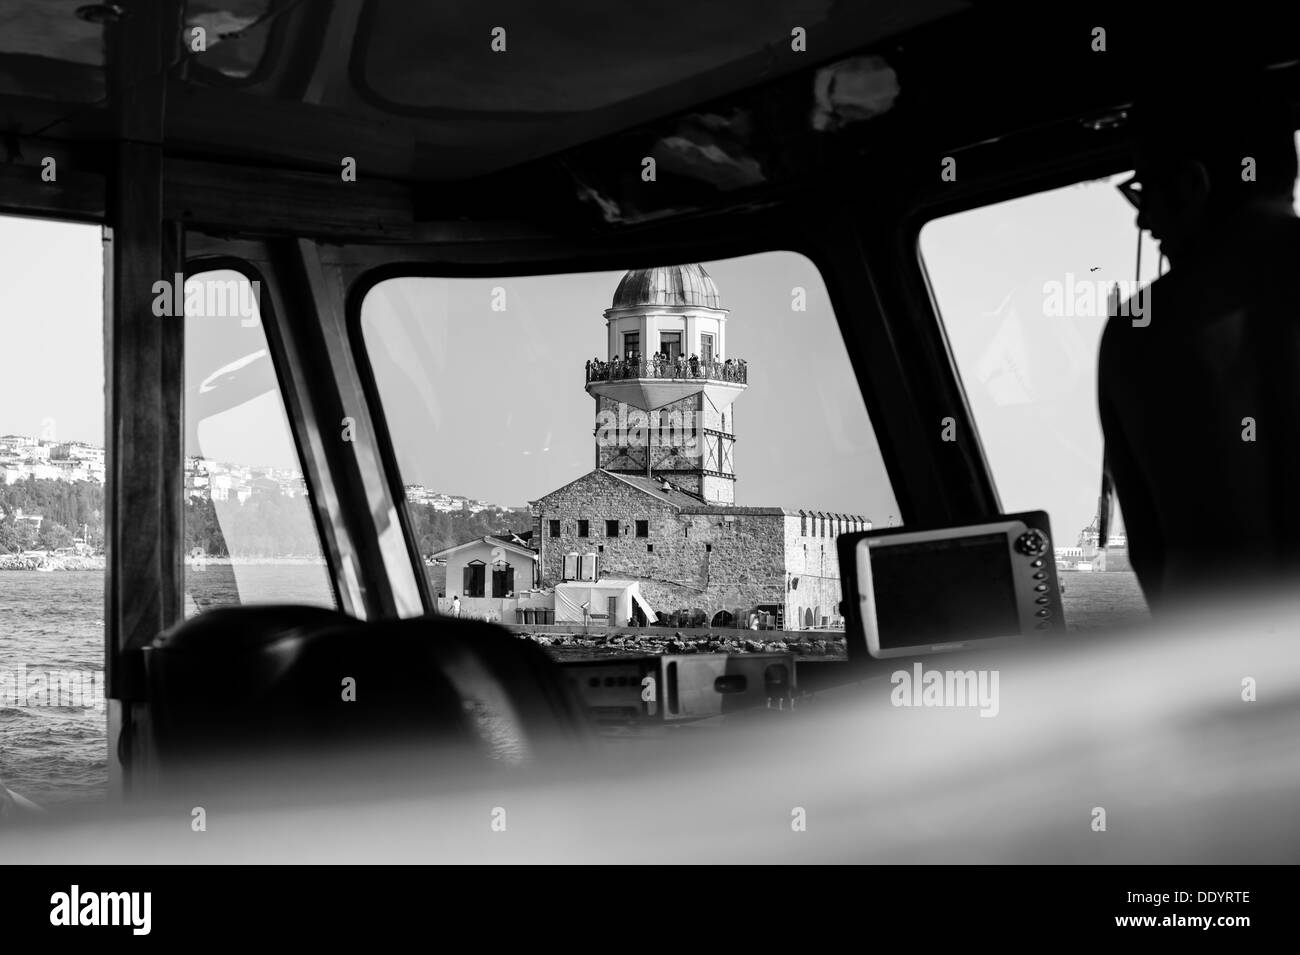 Onboard a boat on the Bosphorus River In Istanbul with the Maiden's Tower Kız Kulesi through the window Stock Photo